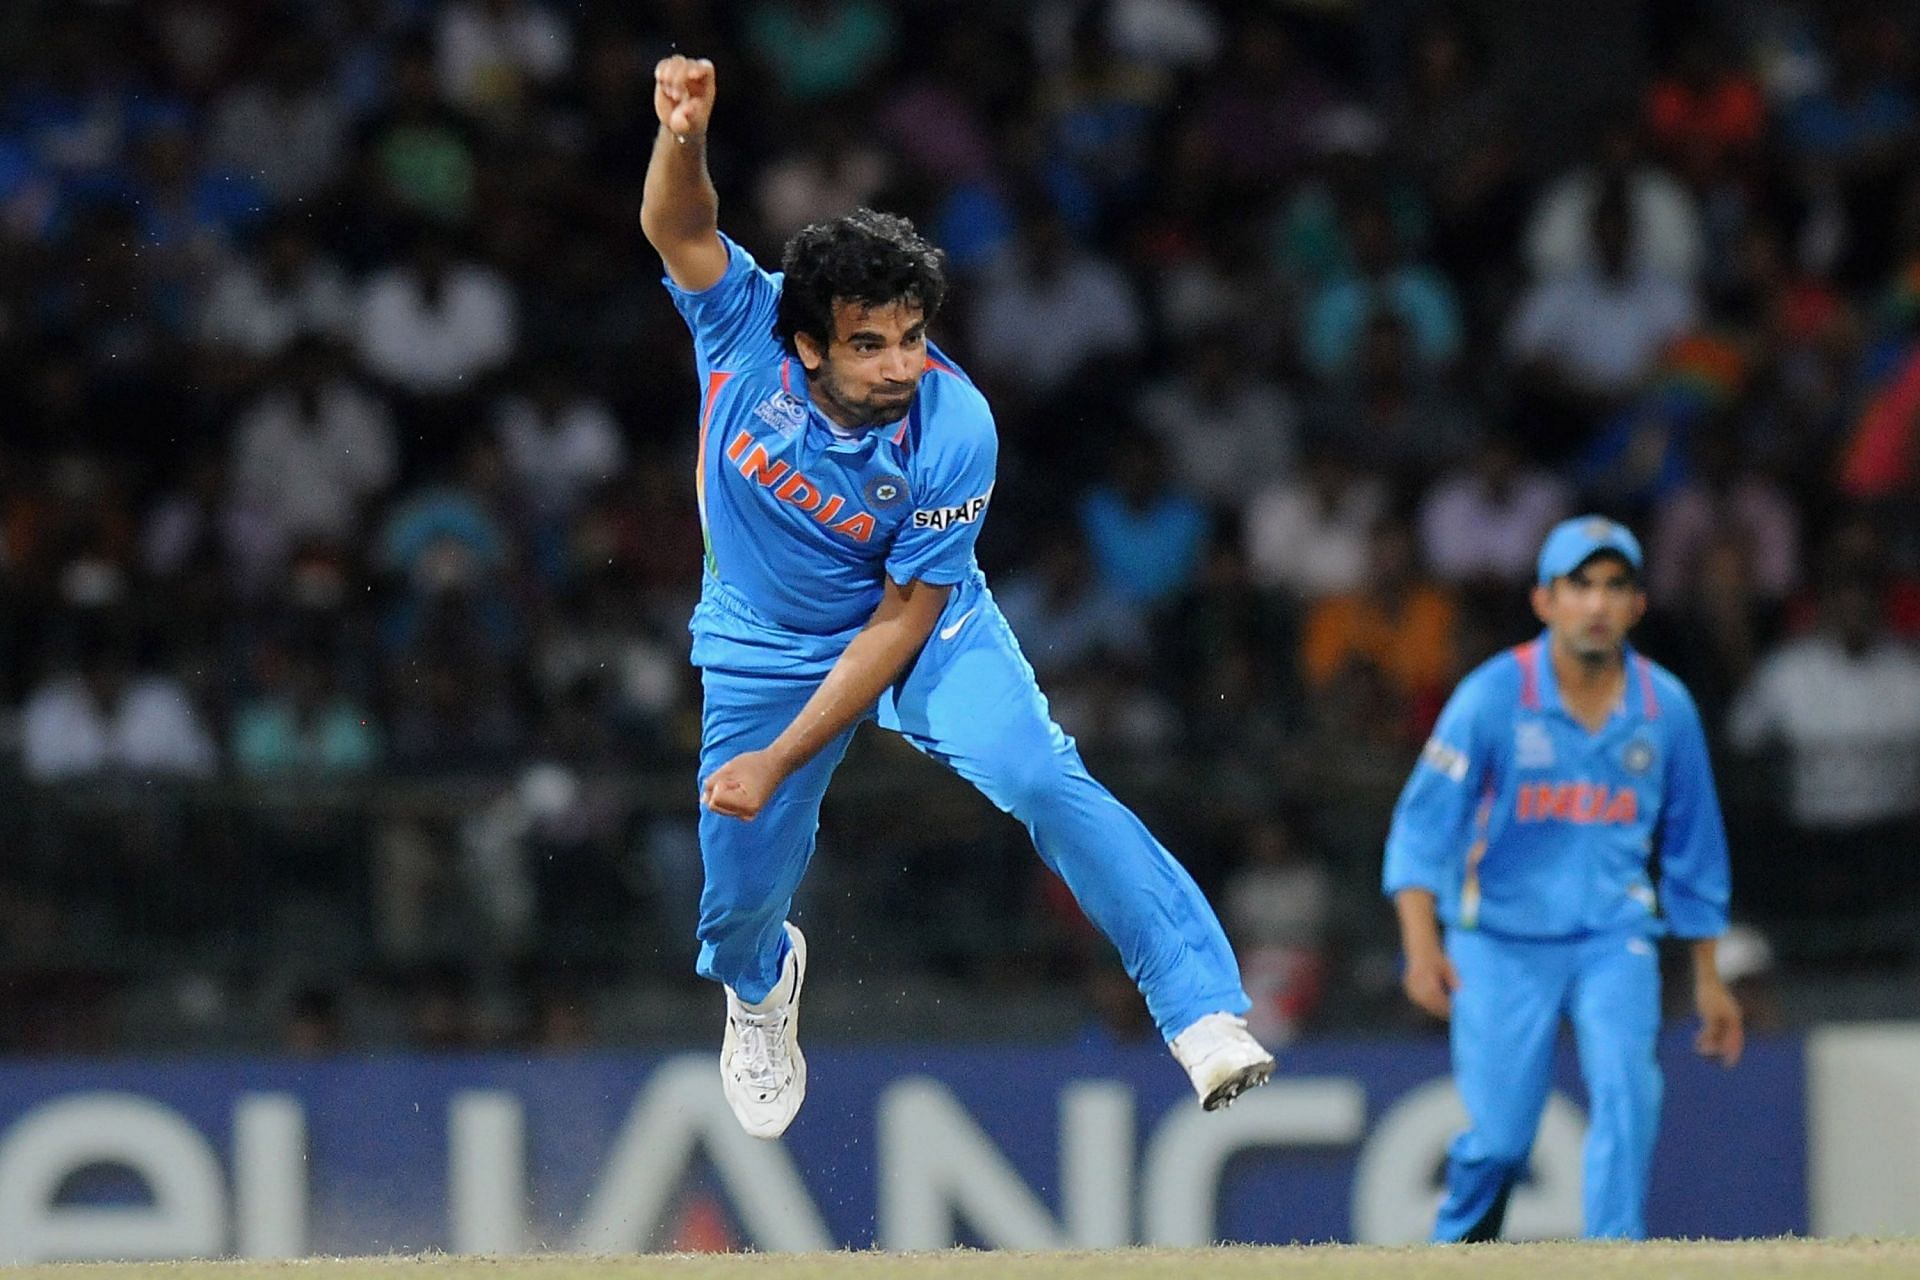 Zaheer Khan played his last T20 World Cup match in 2012